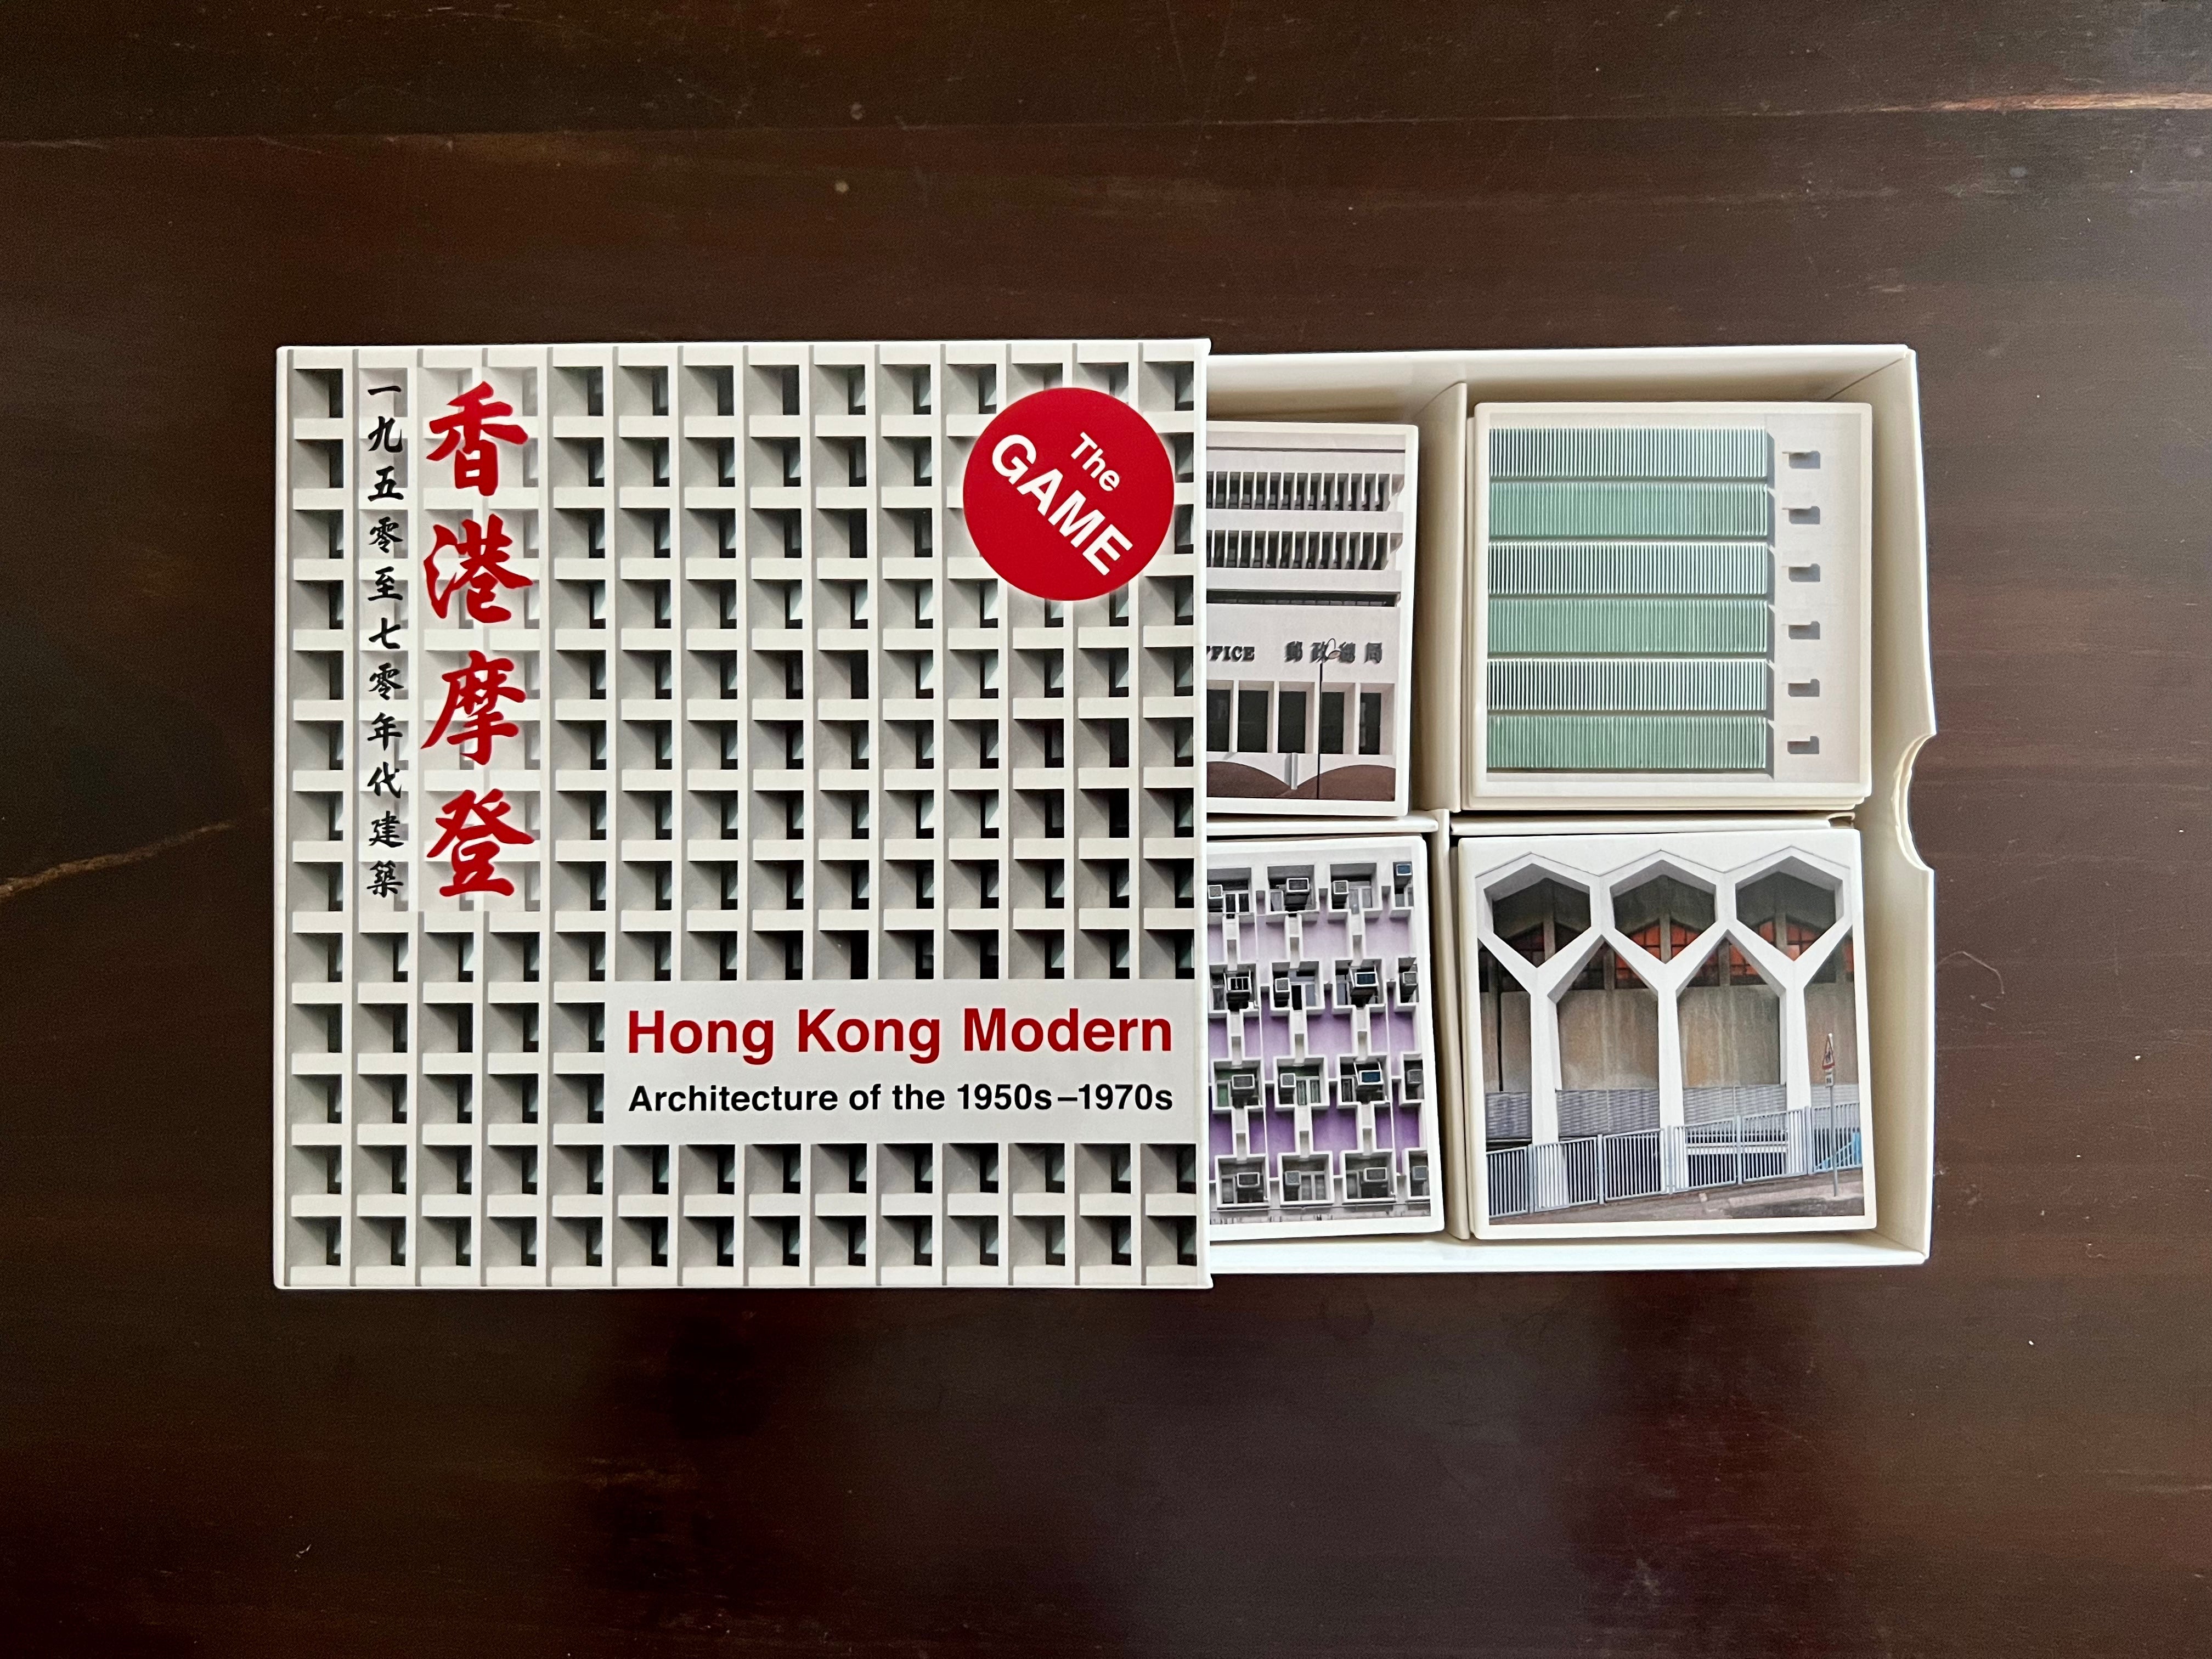 Hong Kong Modern Architecture of the 1950s-1970s - The Game